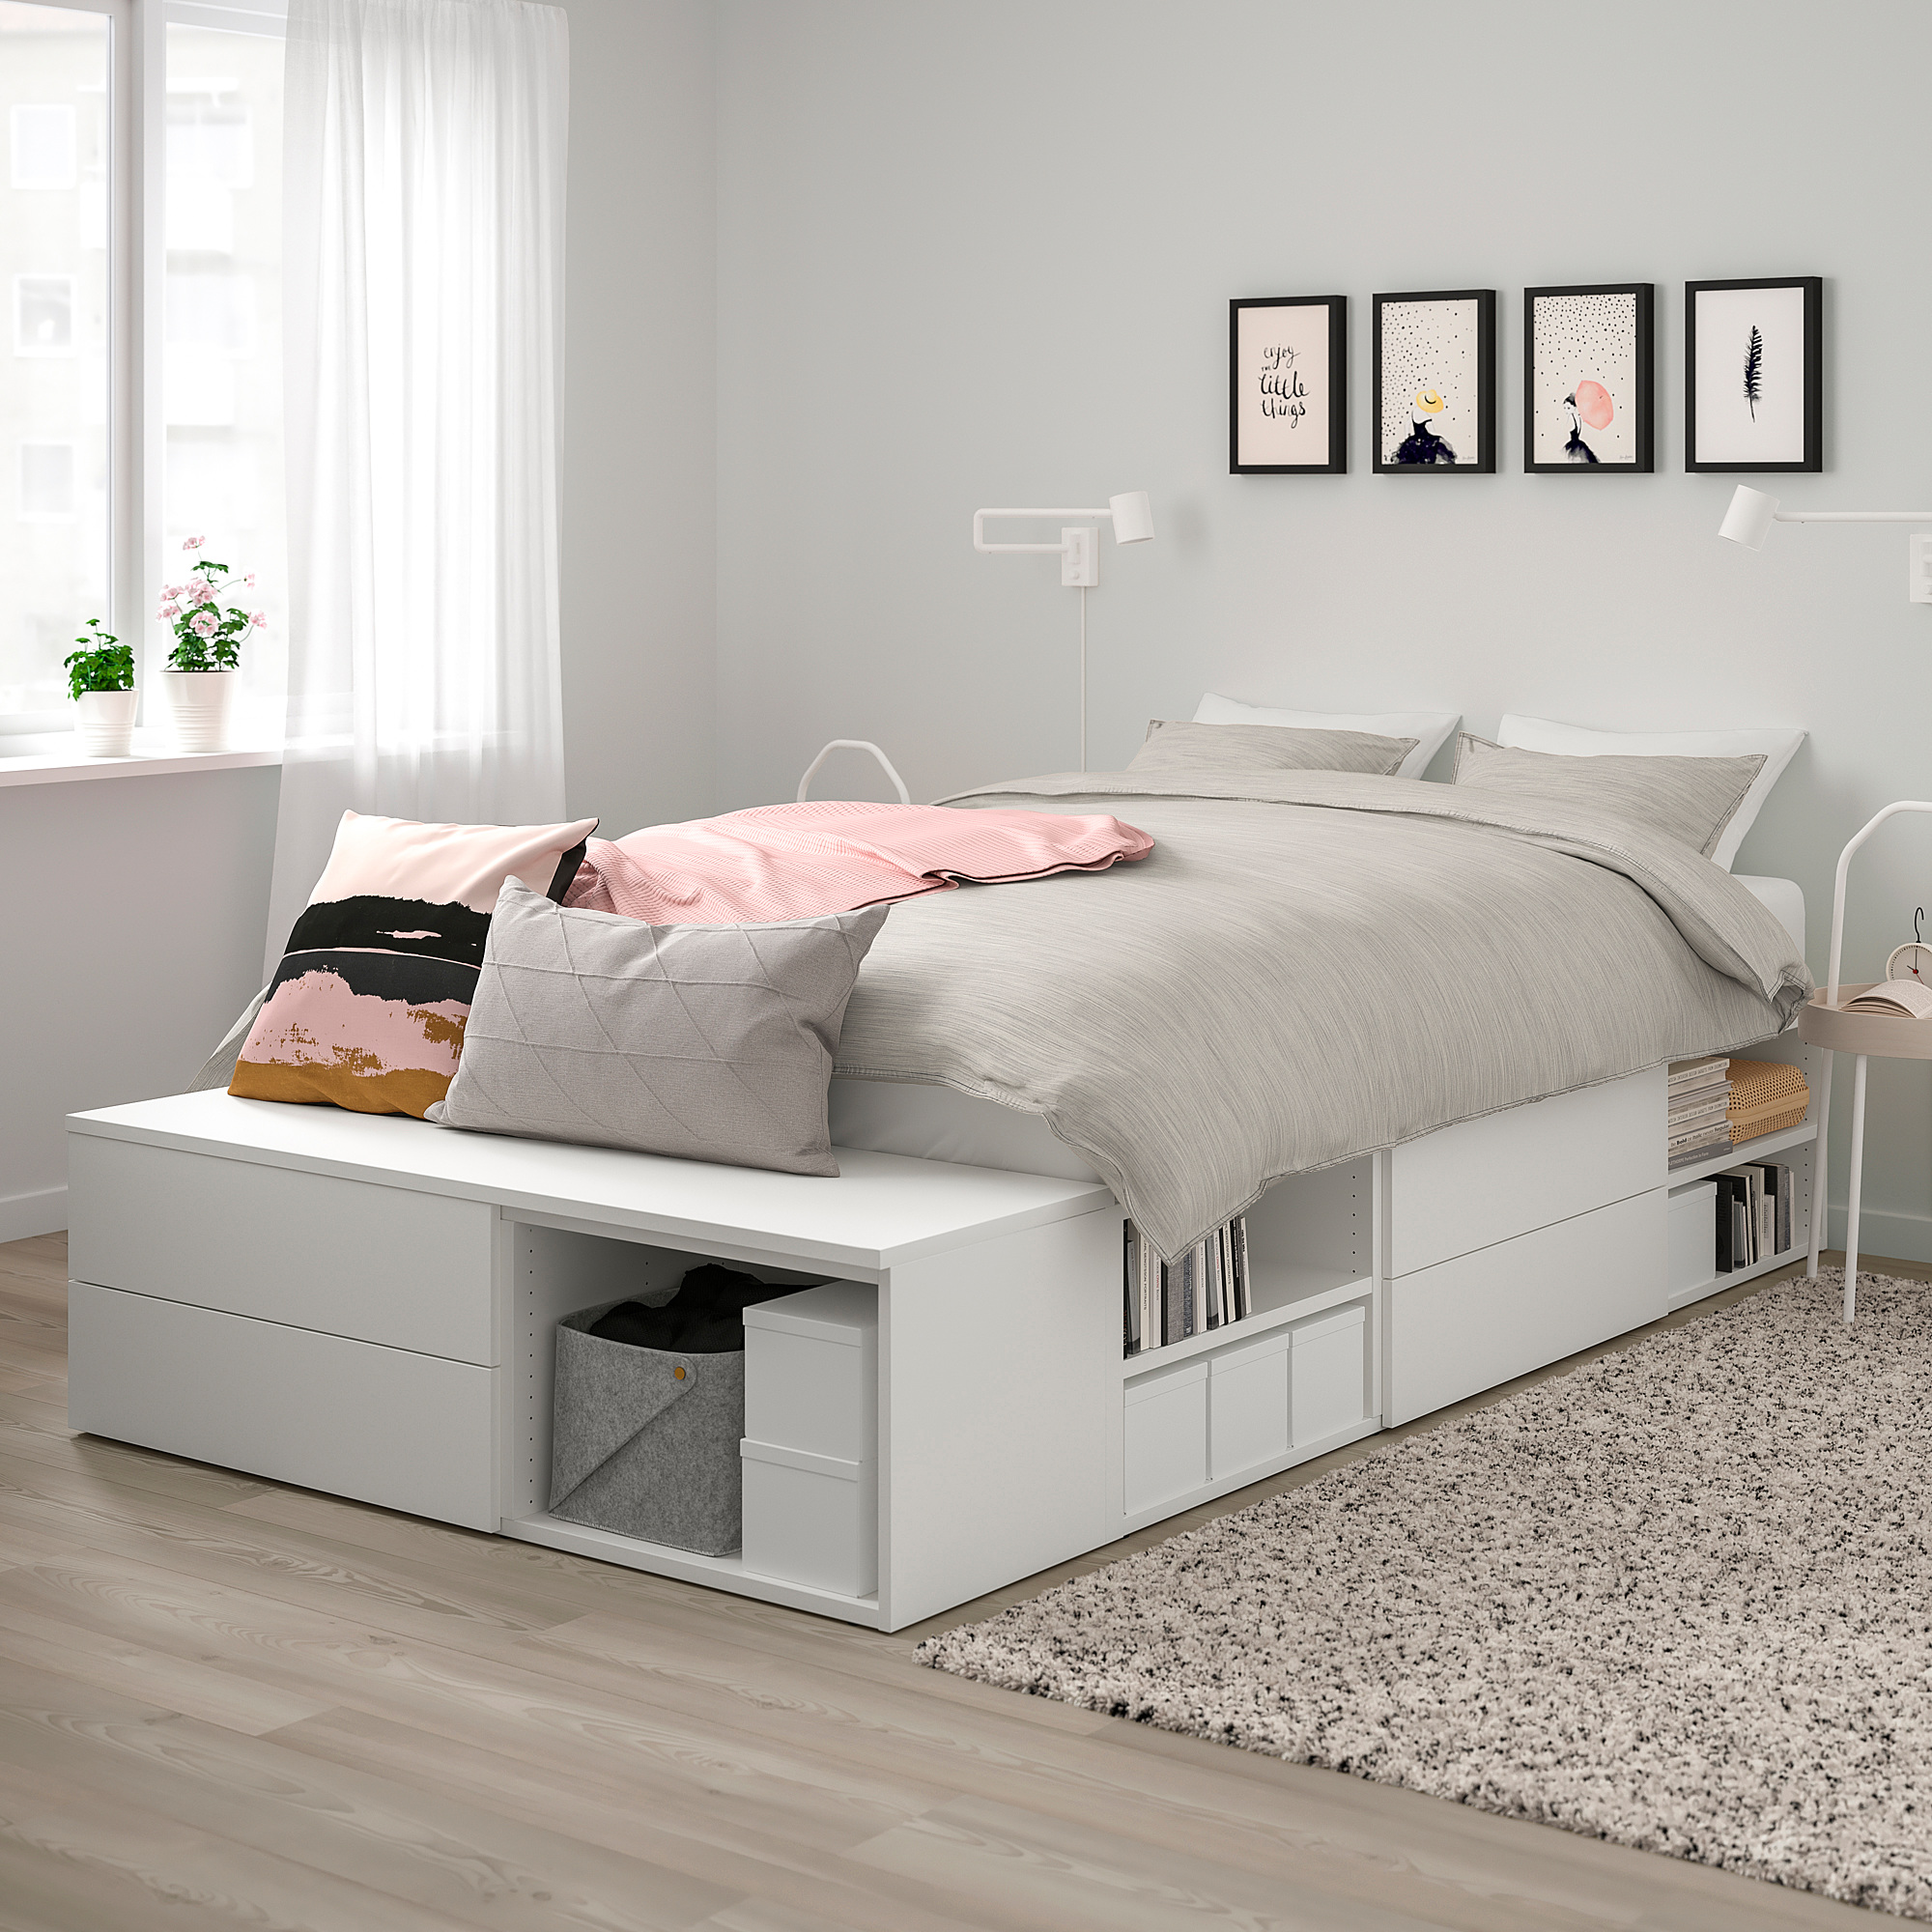 PLATSA bed frame with 4 drawers